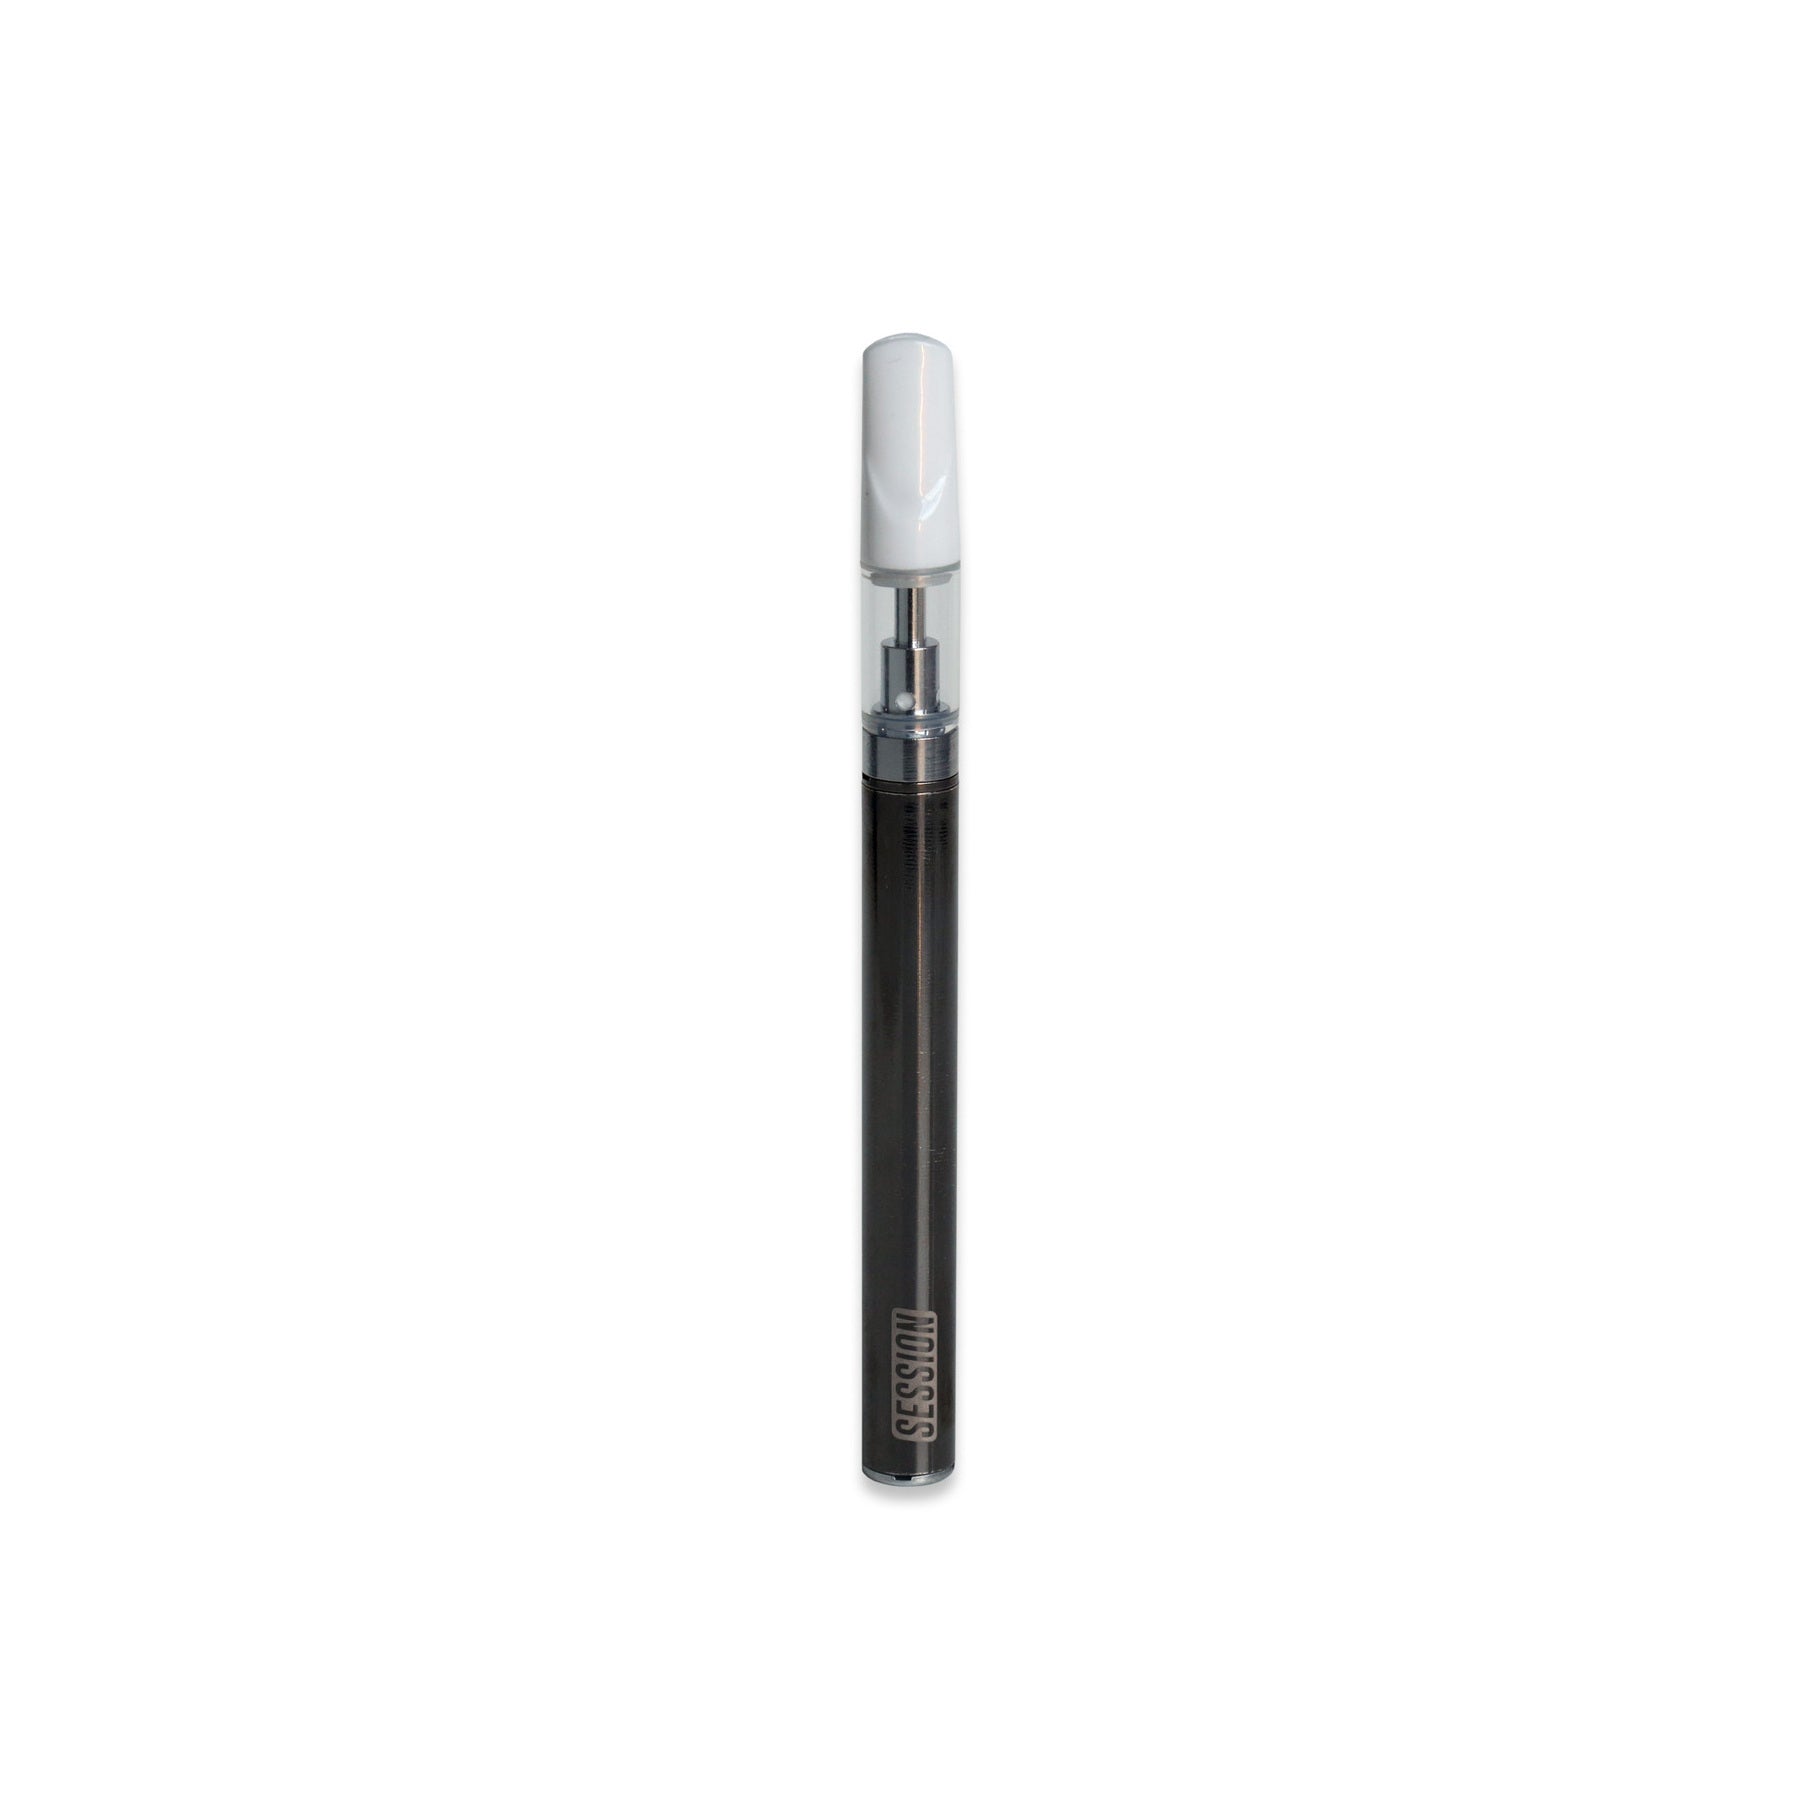 Session AutoDraw Button 510 Thread Battery Session Vapor SESSION®